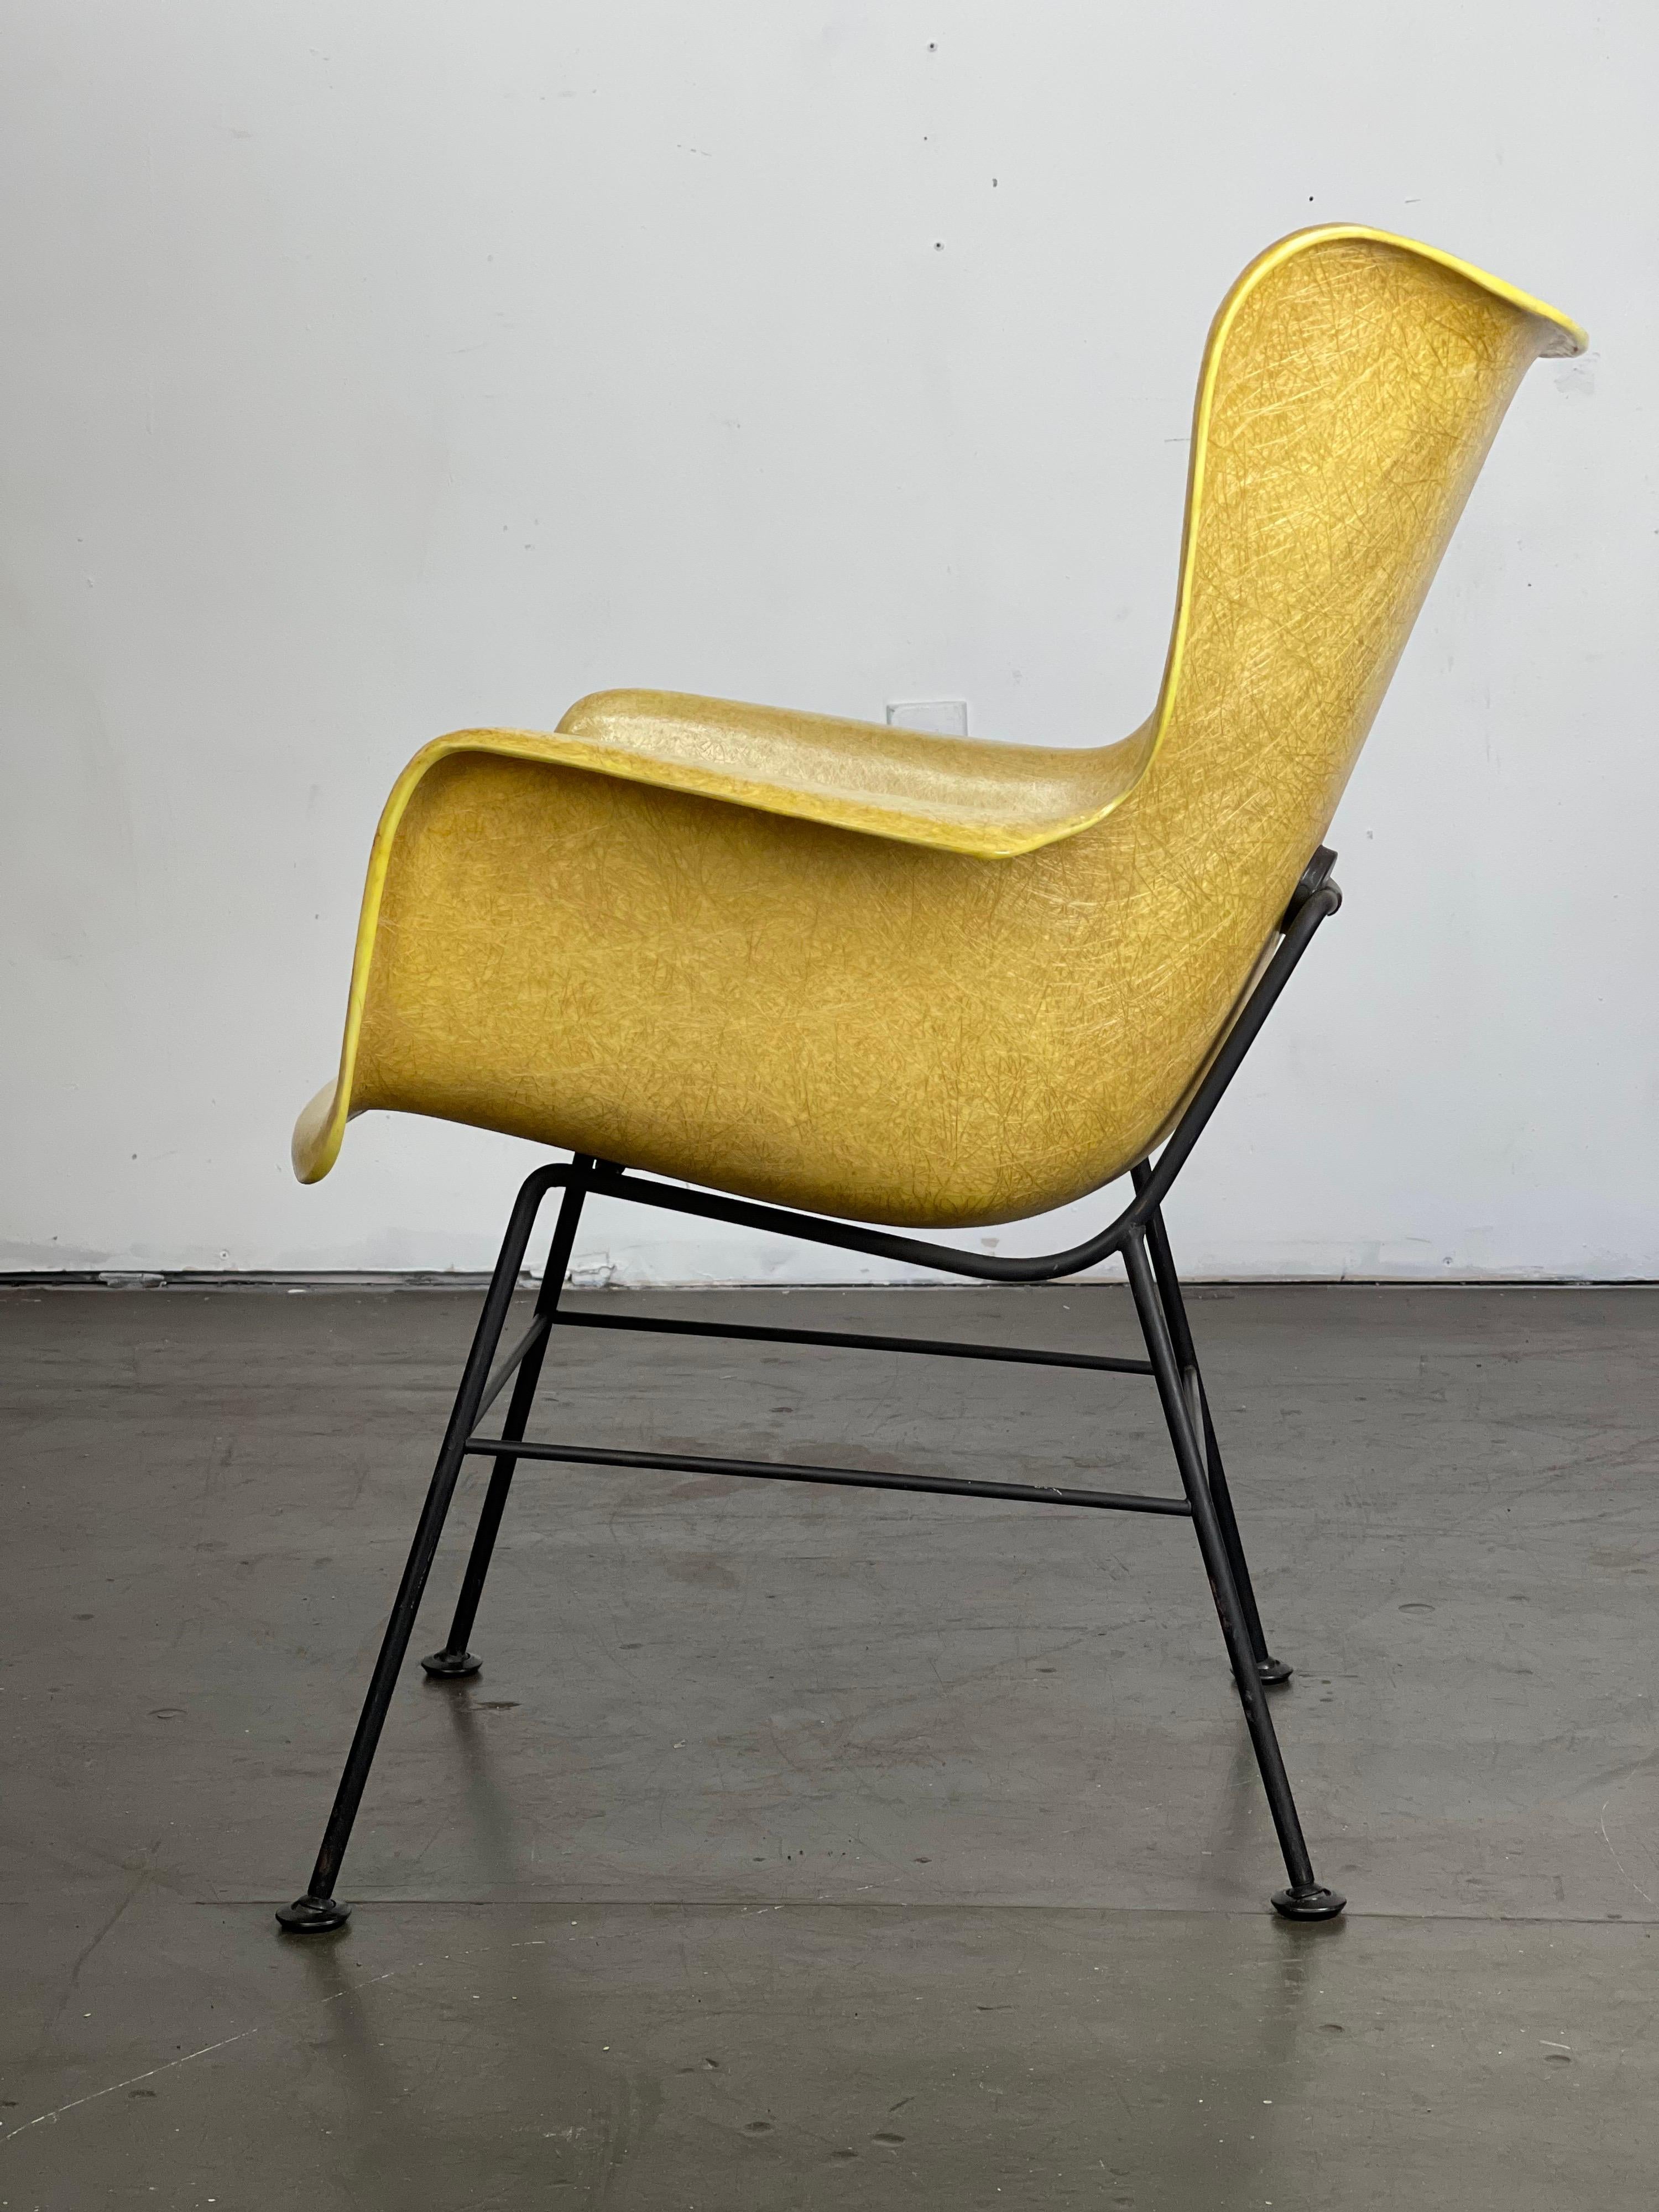 American Mid-Century Modern Sculptural Lounge Chair by Lawrence Peabody for Selig Labeled